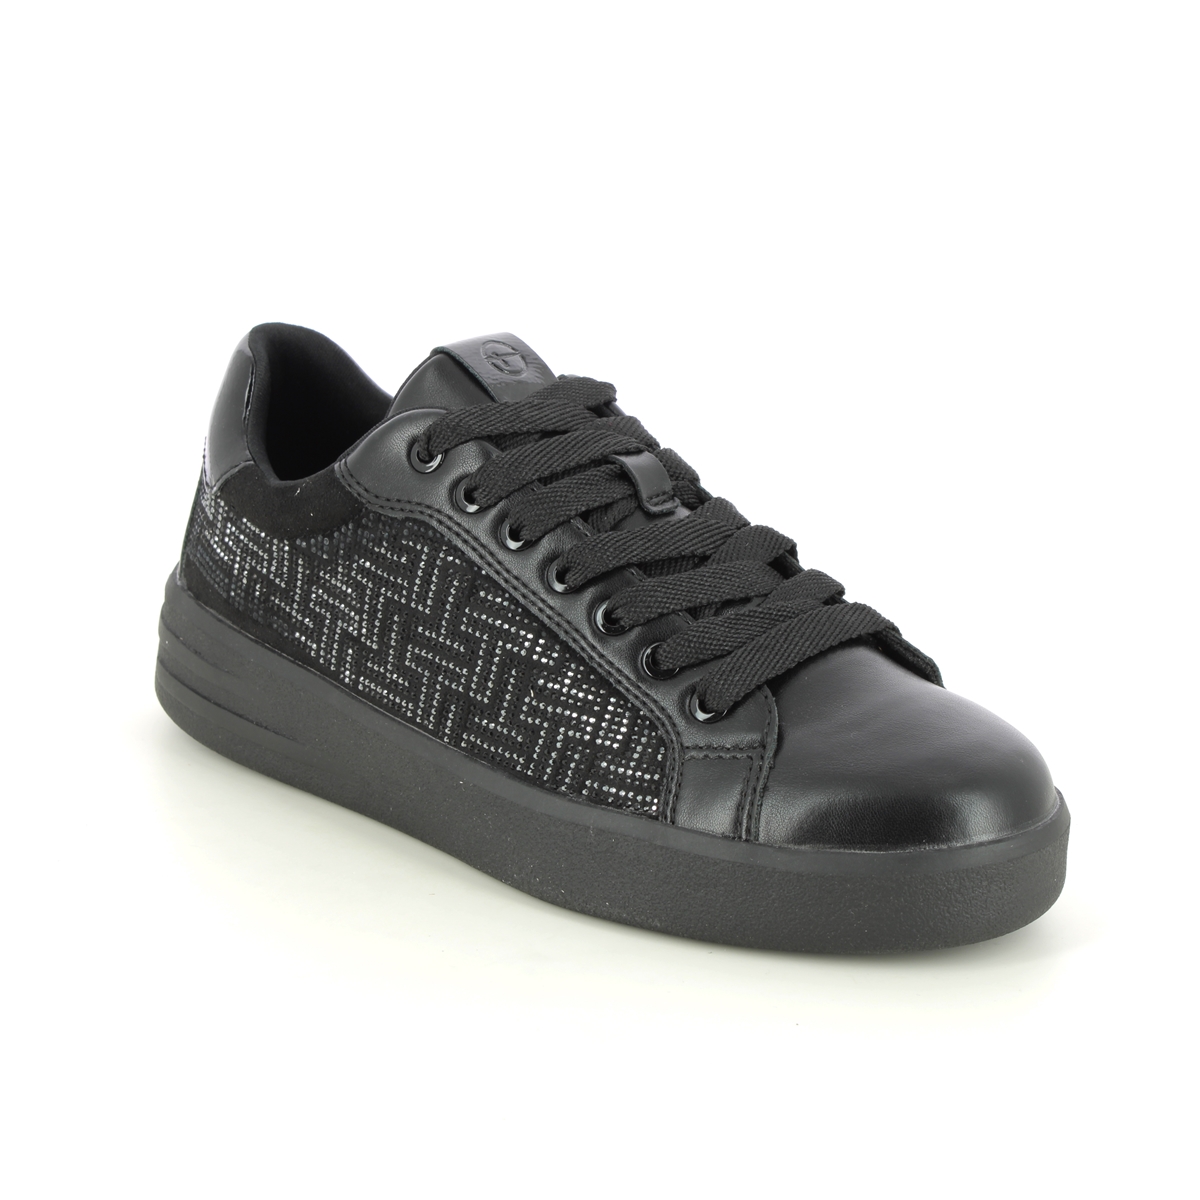 Tamaris Skylar Black Womens trainers 23734-41-007 in a Plain Man-made in Size 37